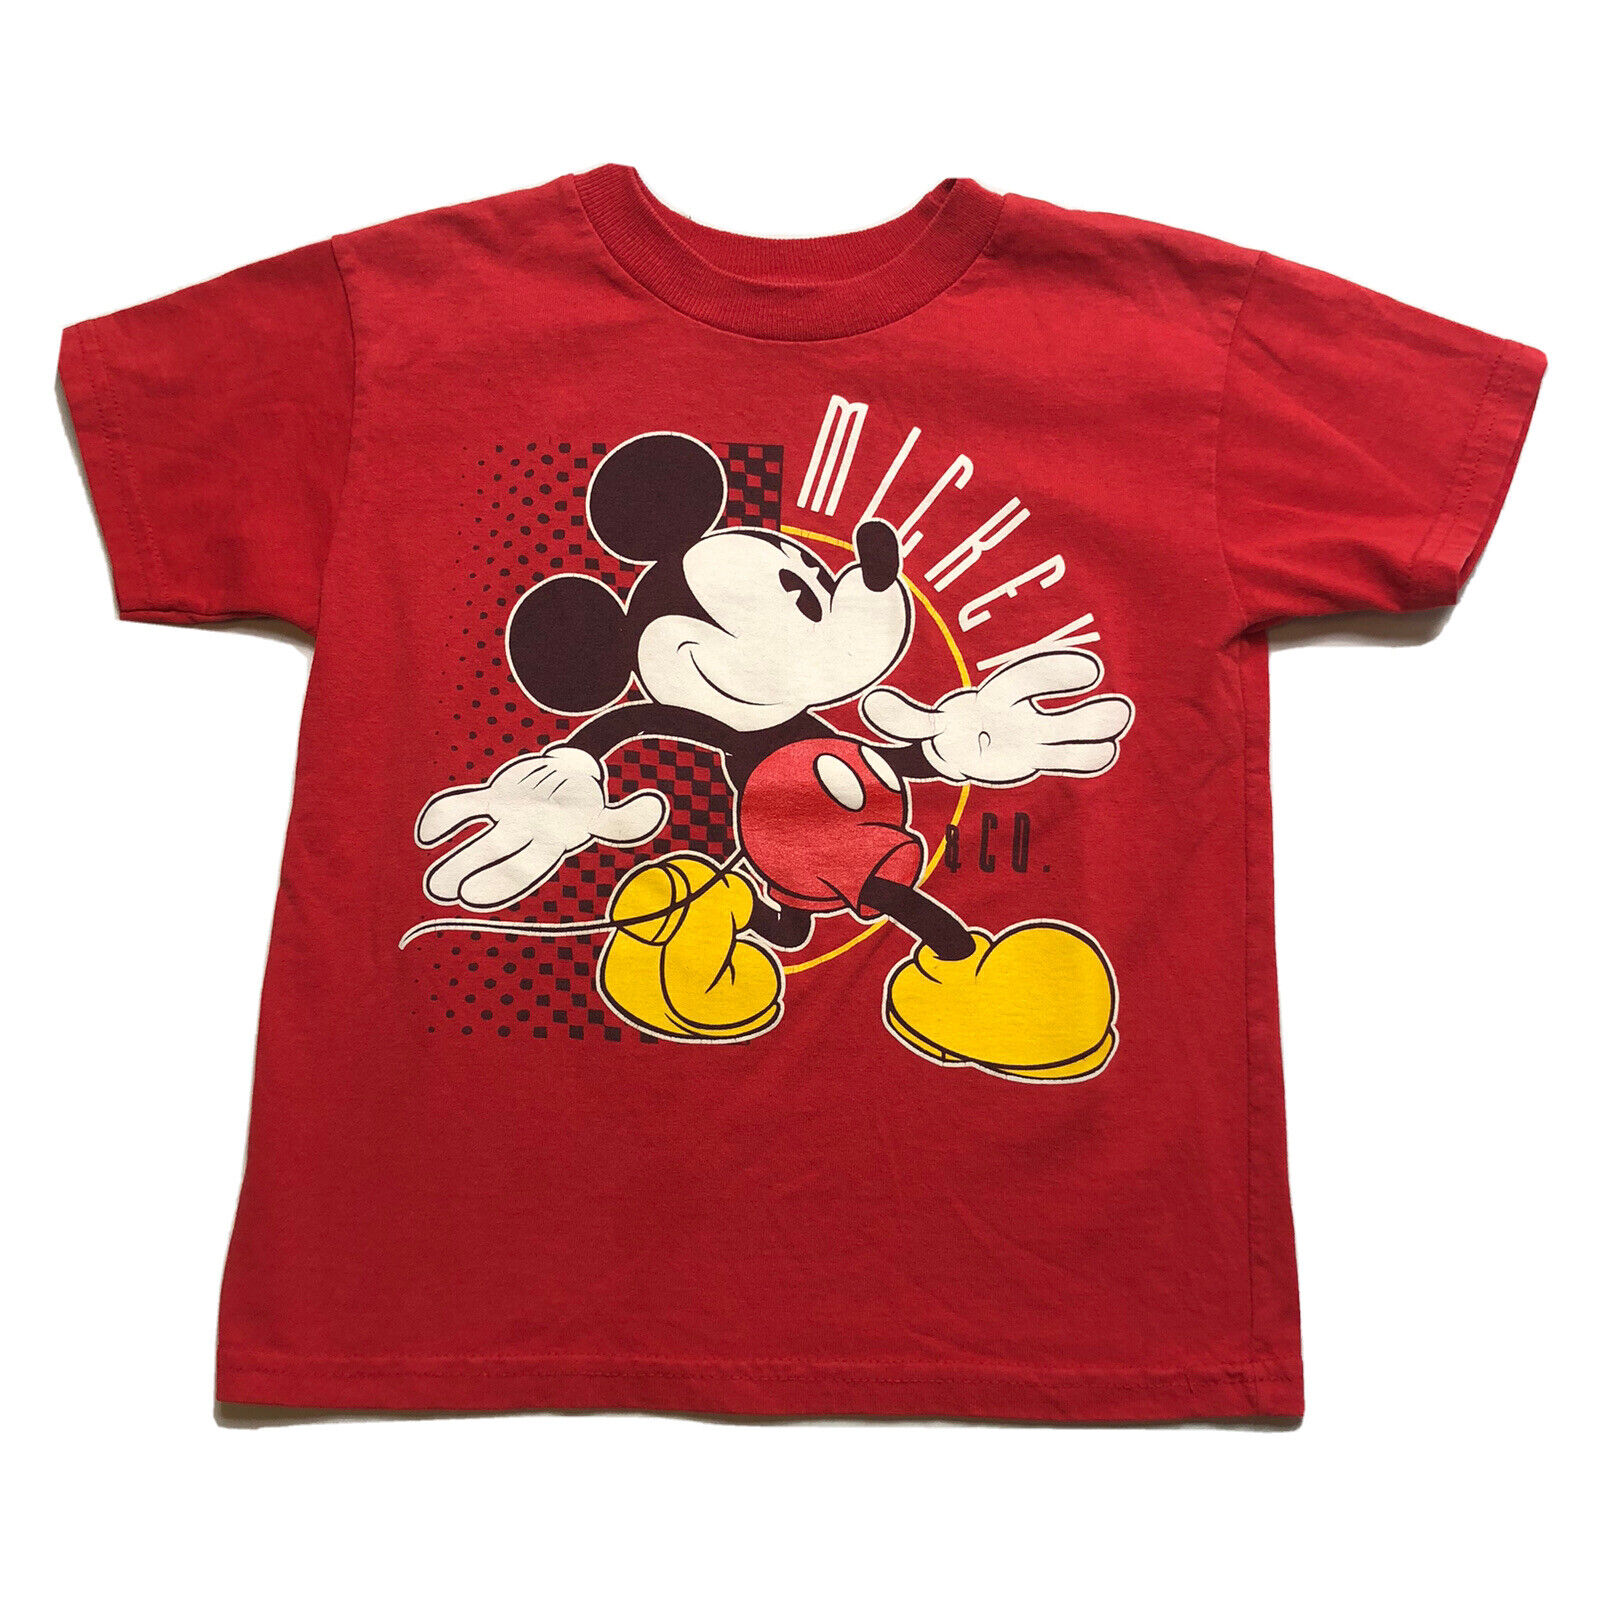 Vintage 1980s Walt Disney World Mickey Mouse T-Shirt Red Size Youth Small